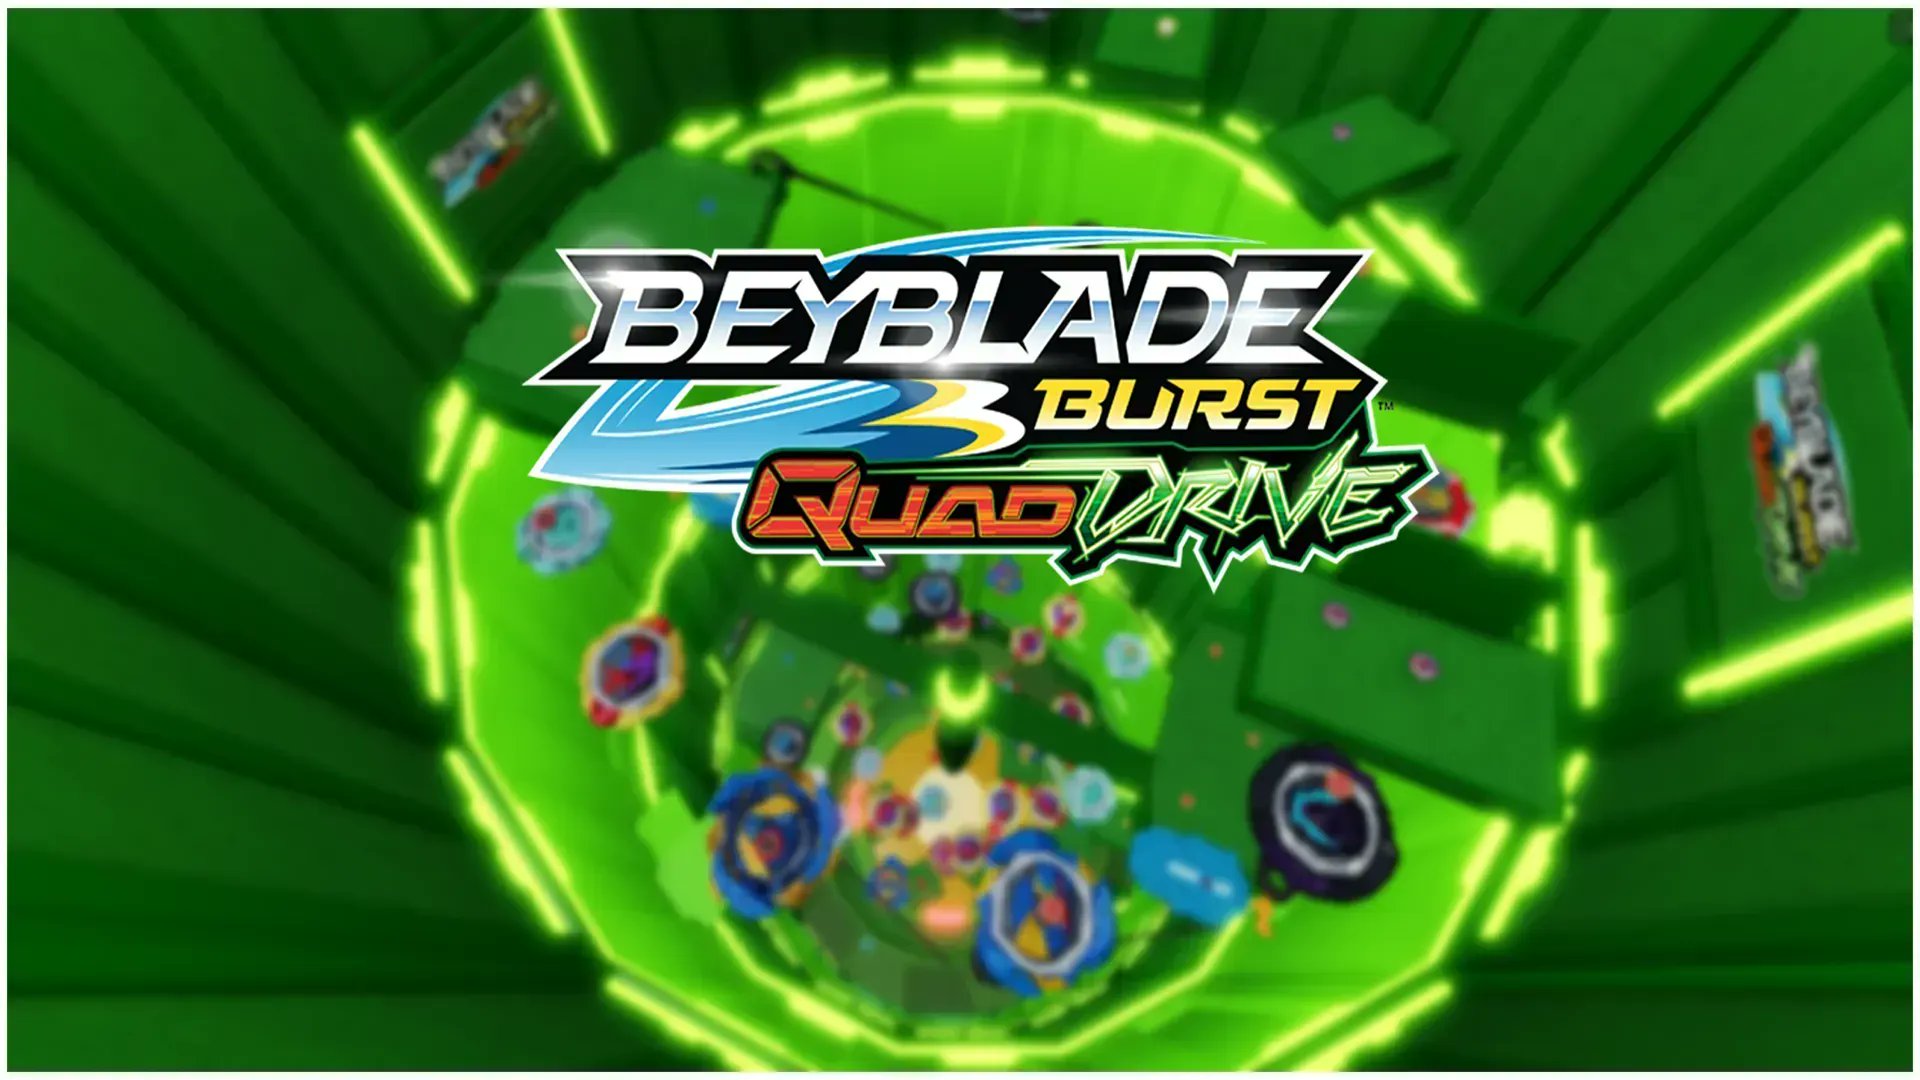 Gamefam Studios on Twitter: "Beyblade has come to Tower of Misery in an event through December Players are sent on a perilous quest in this brand-new Beyblade-themed event! #RobloxDev